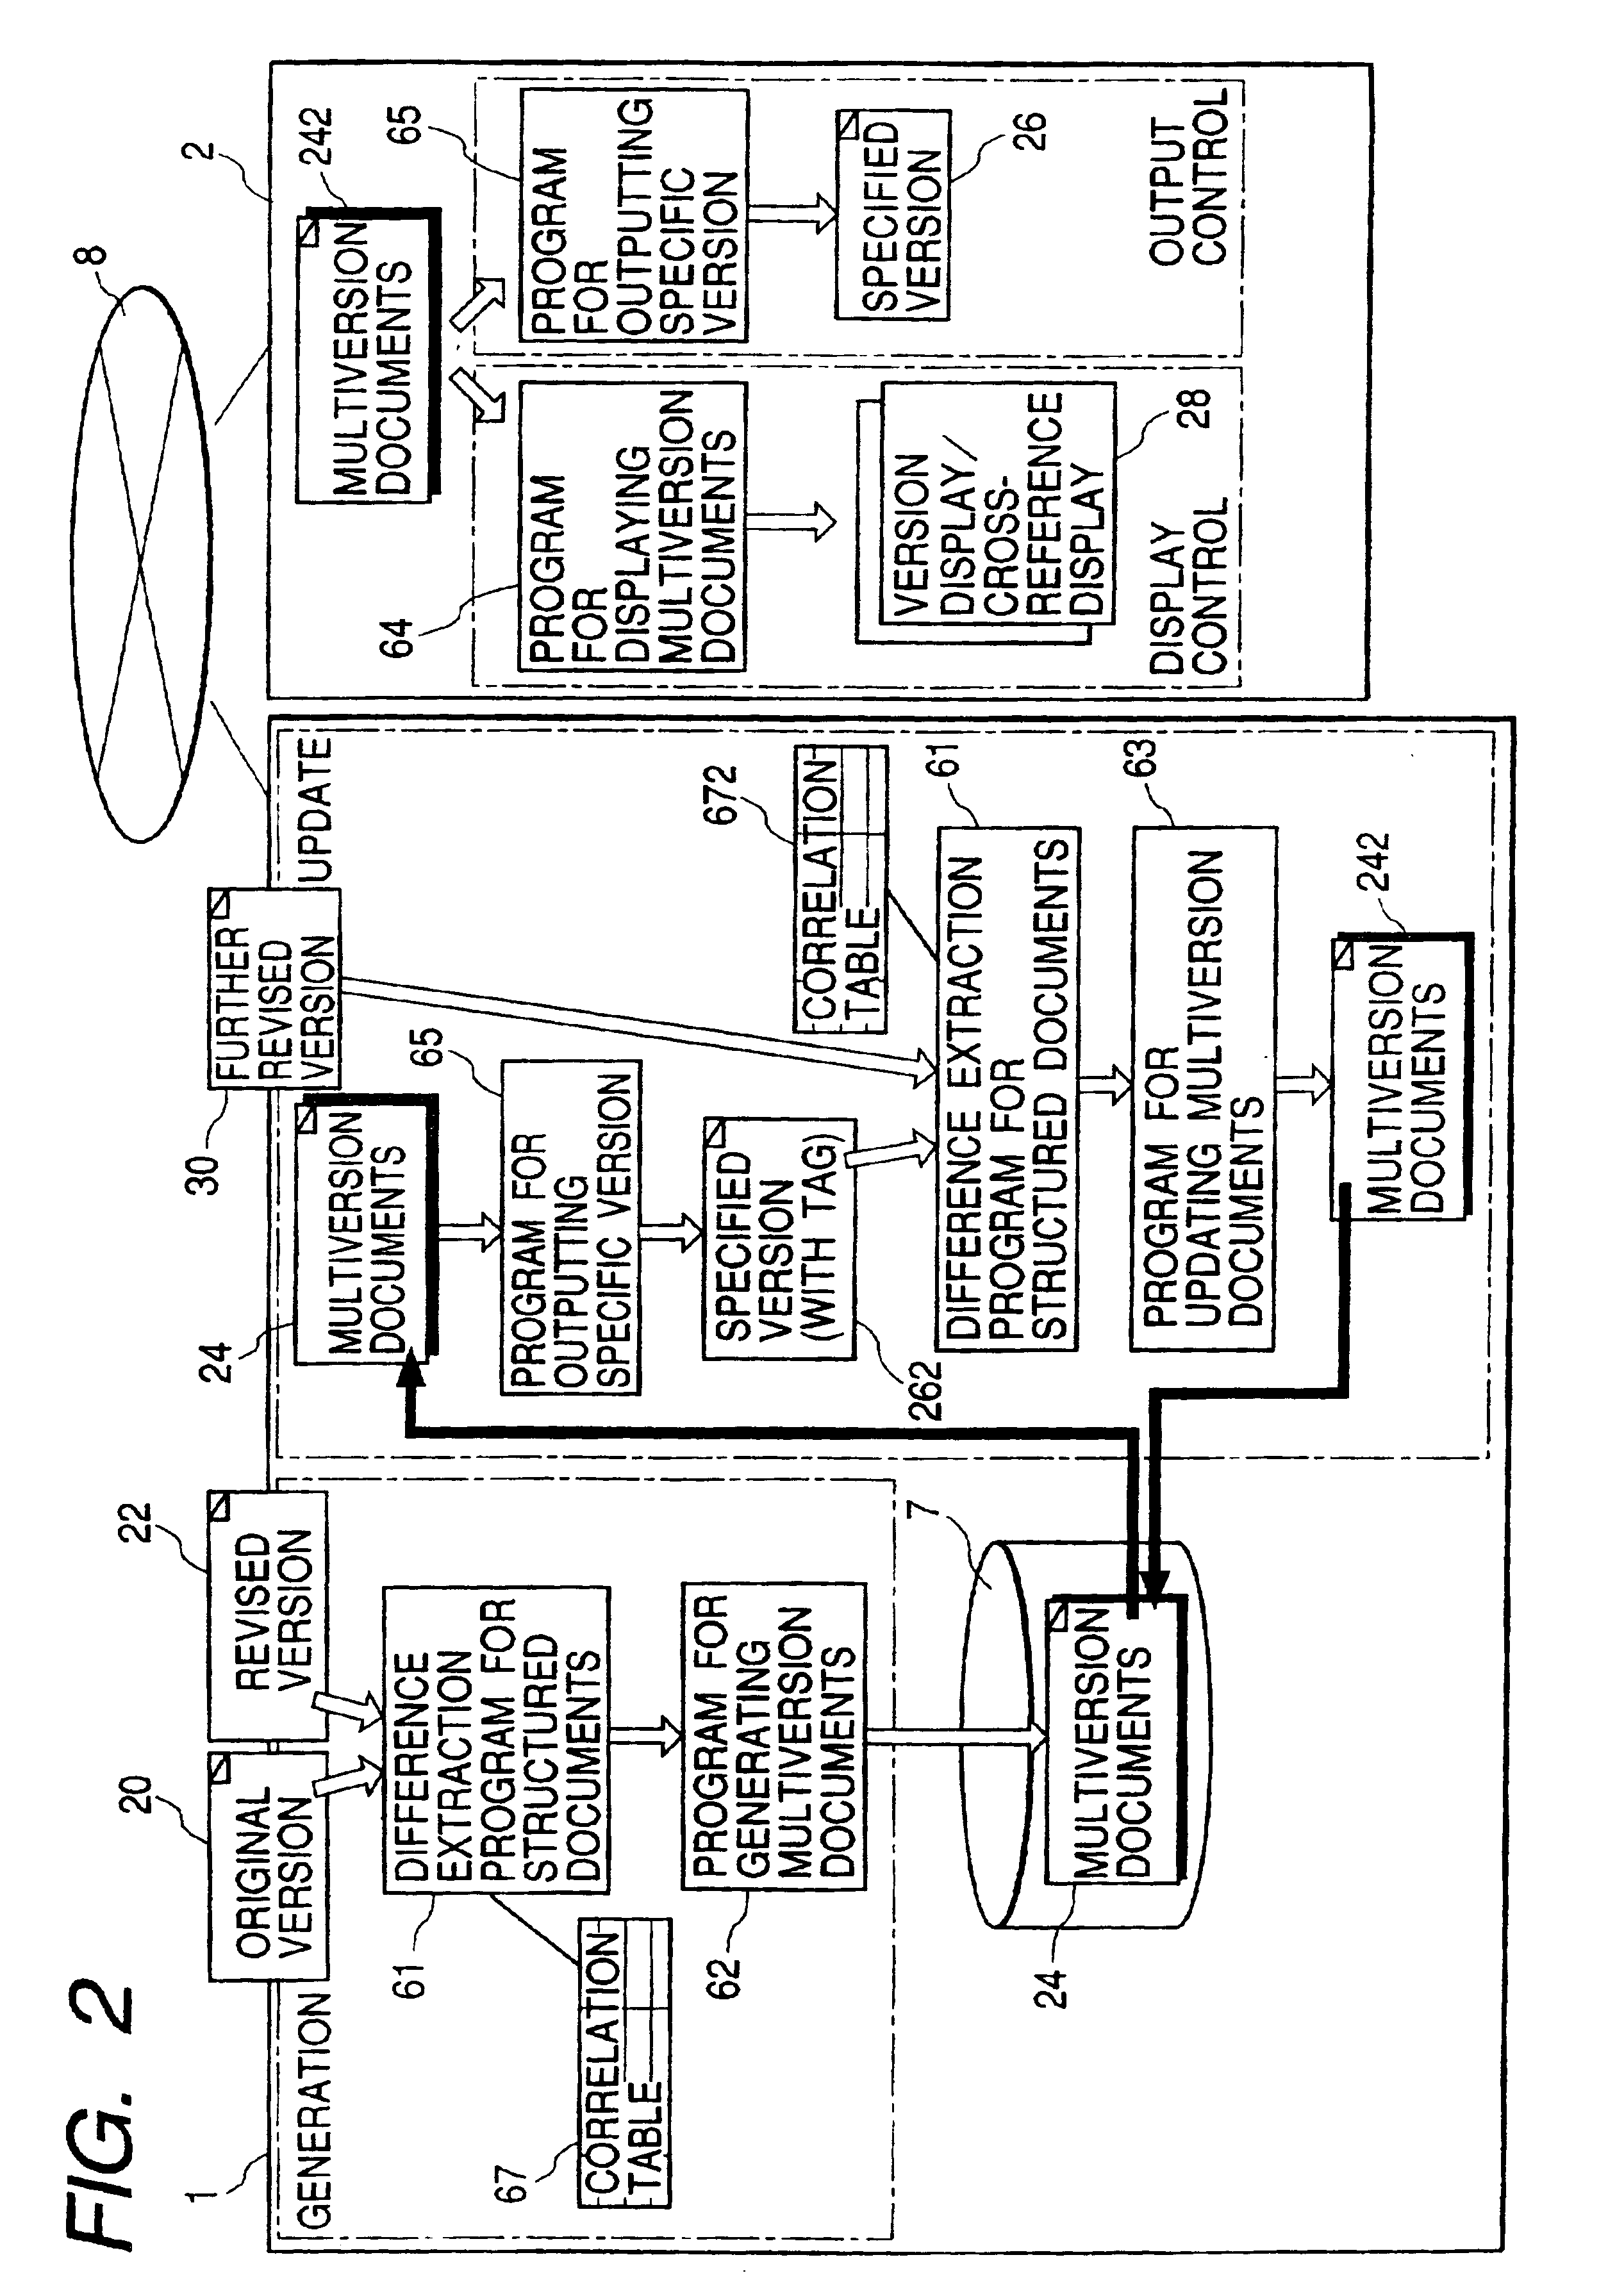 Method and system for managing documents